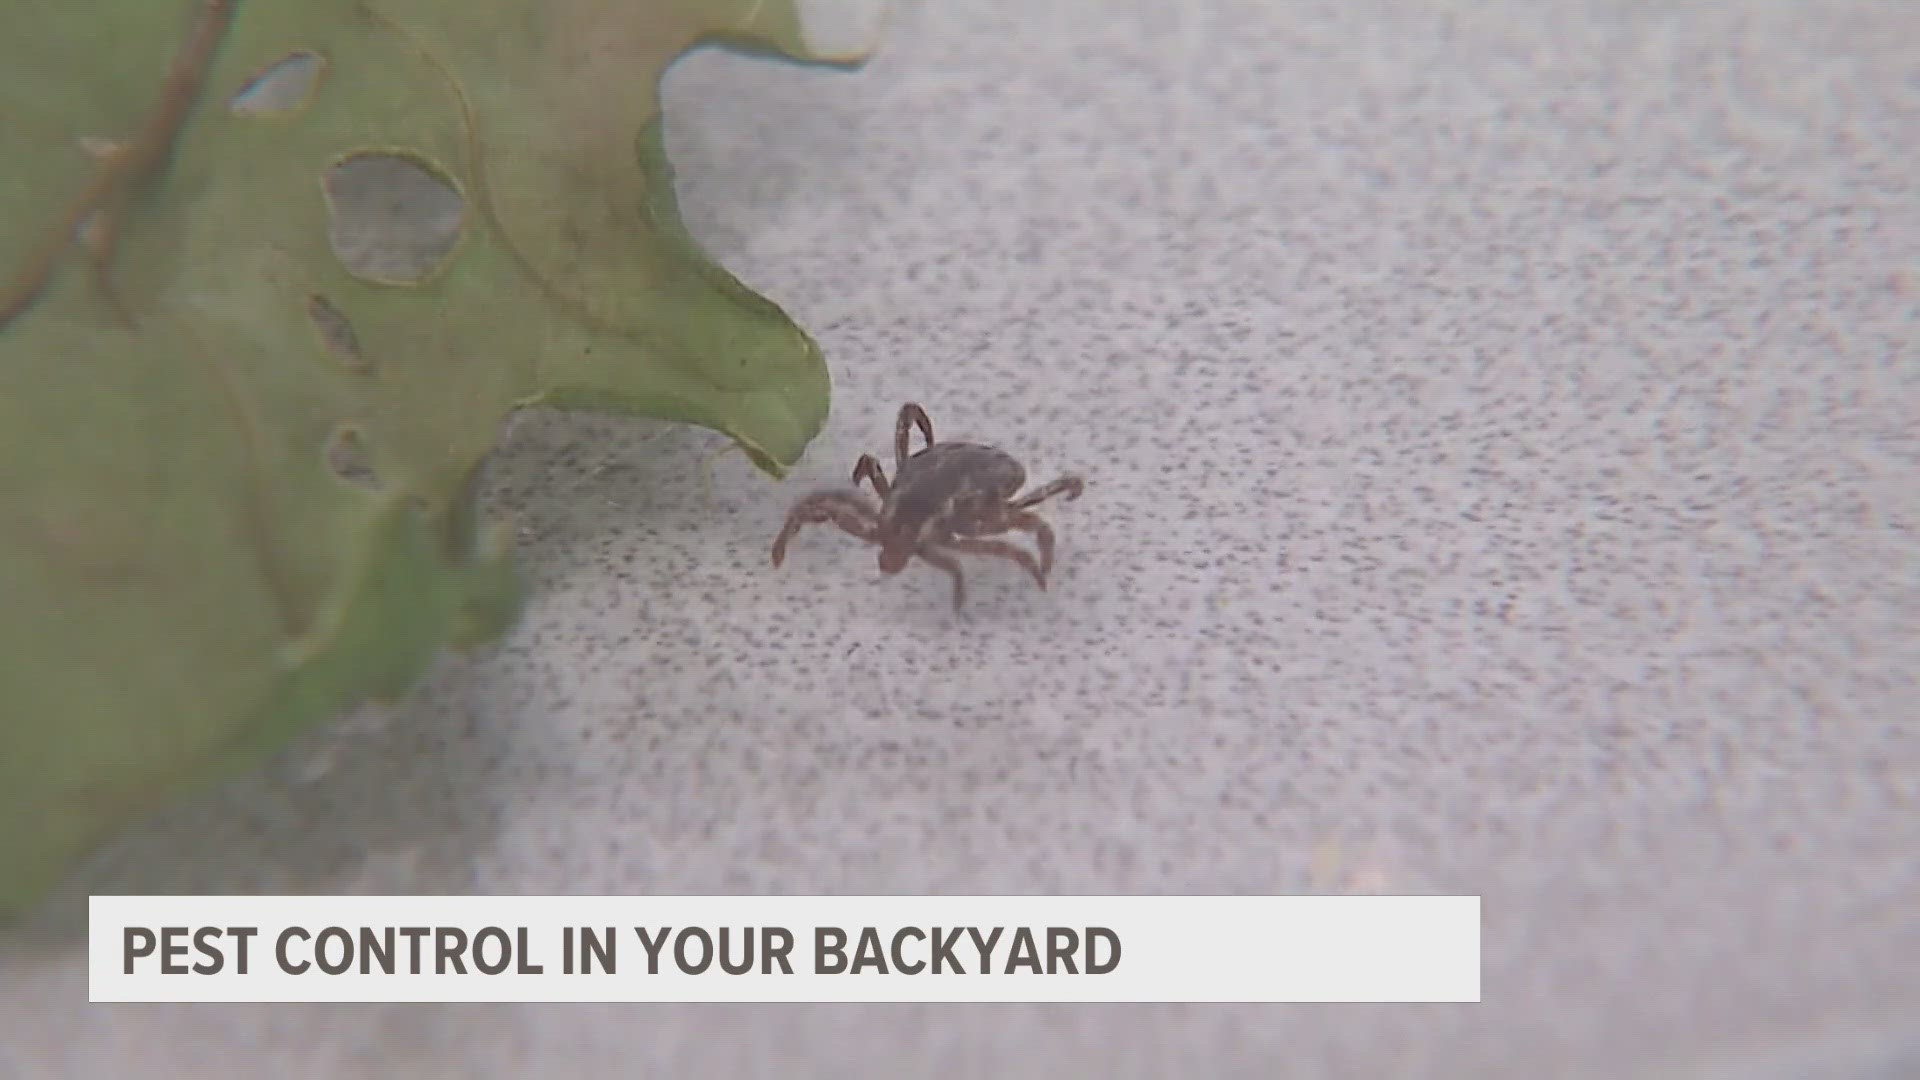 From preventing overgrown lawns and brush to applying pesticides, there are plenty of options to help keep your backyard tick-free this summer.